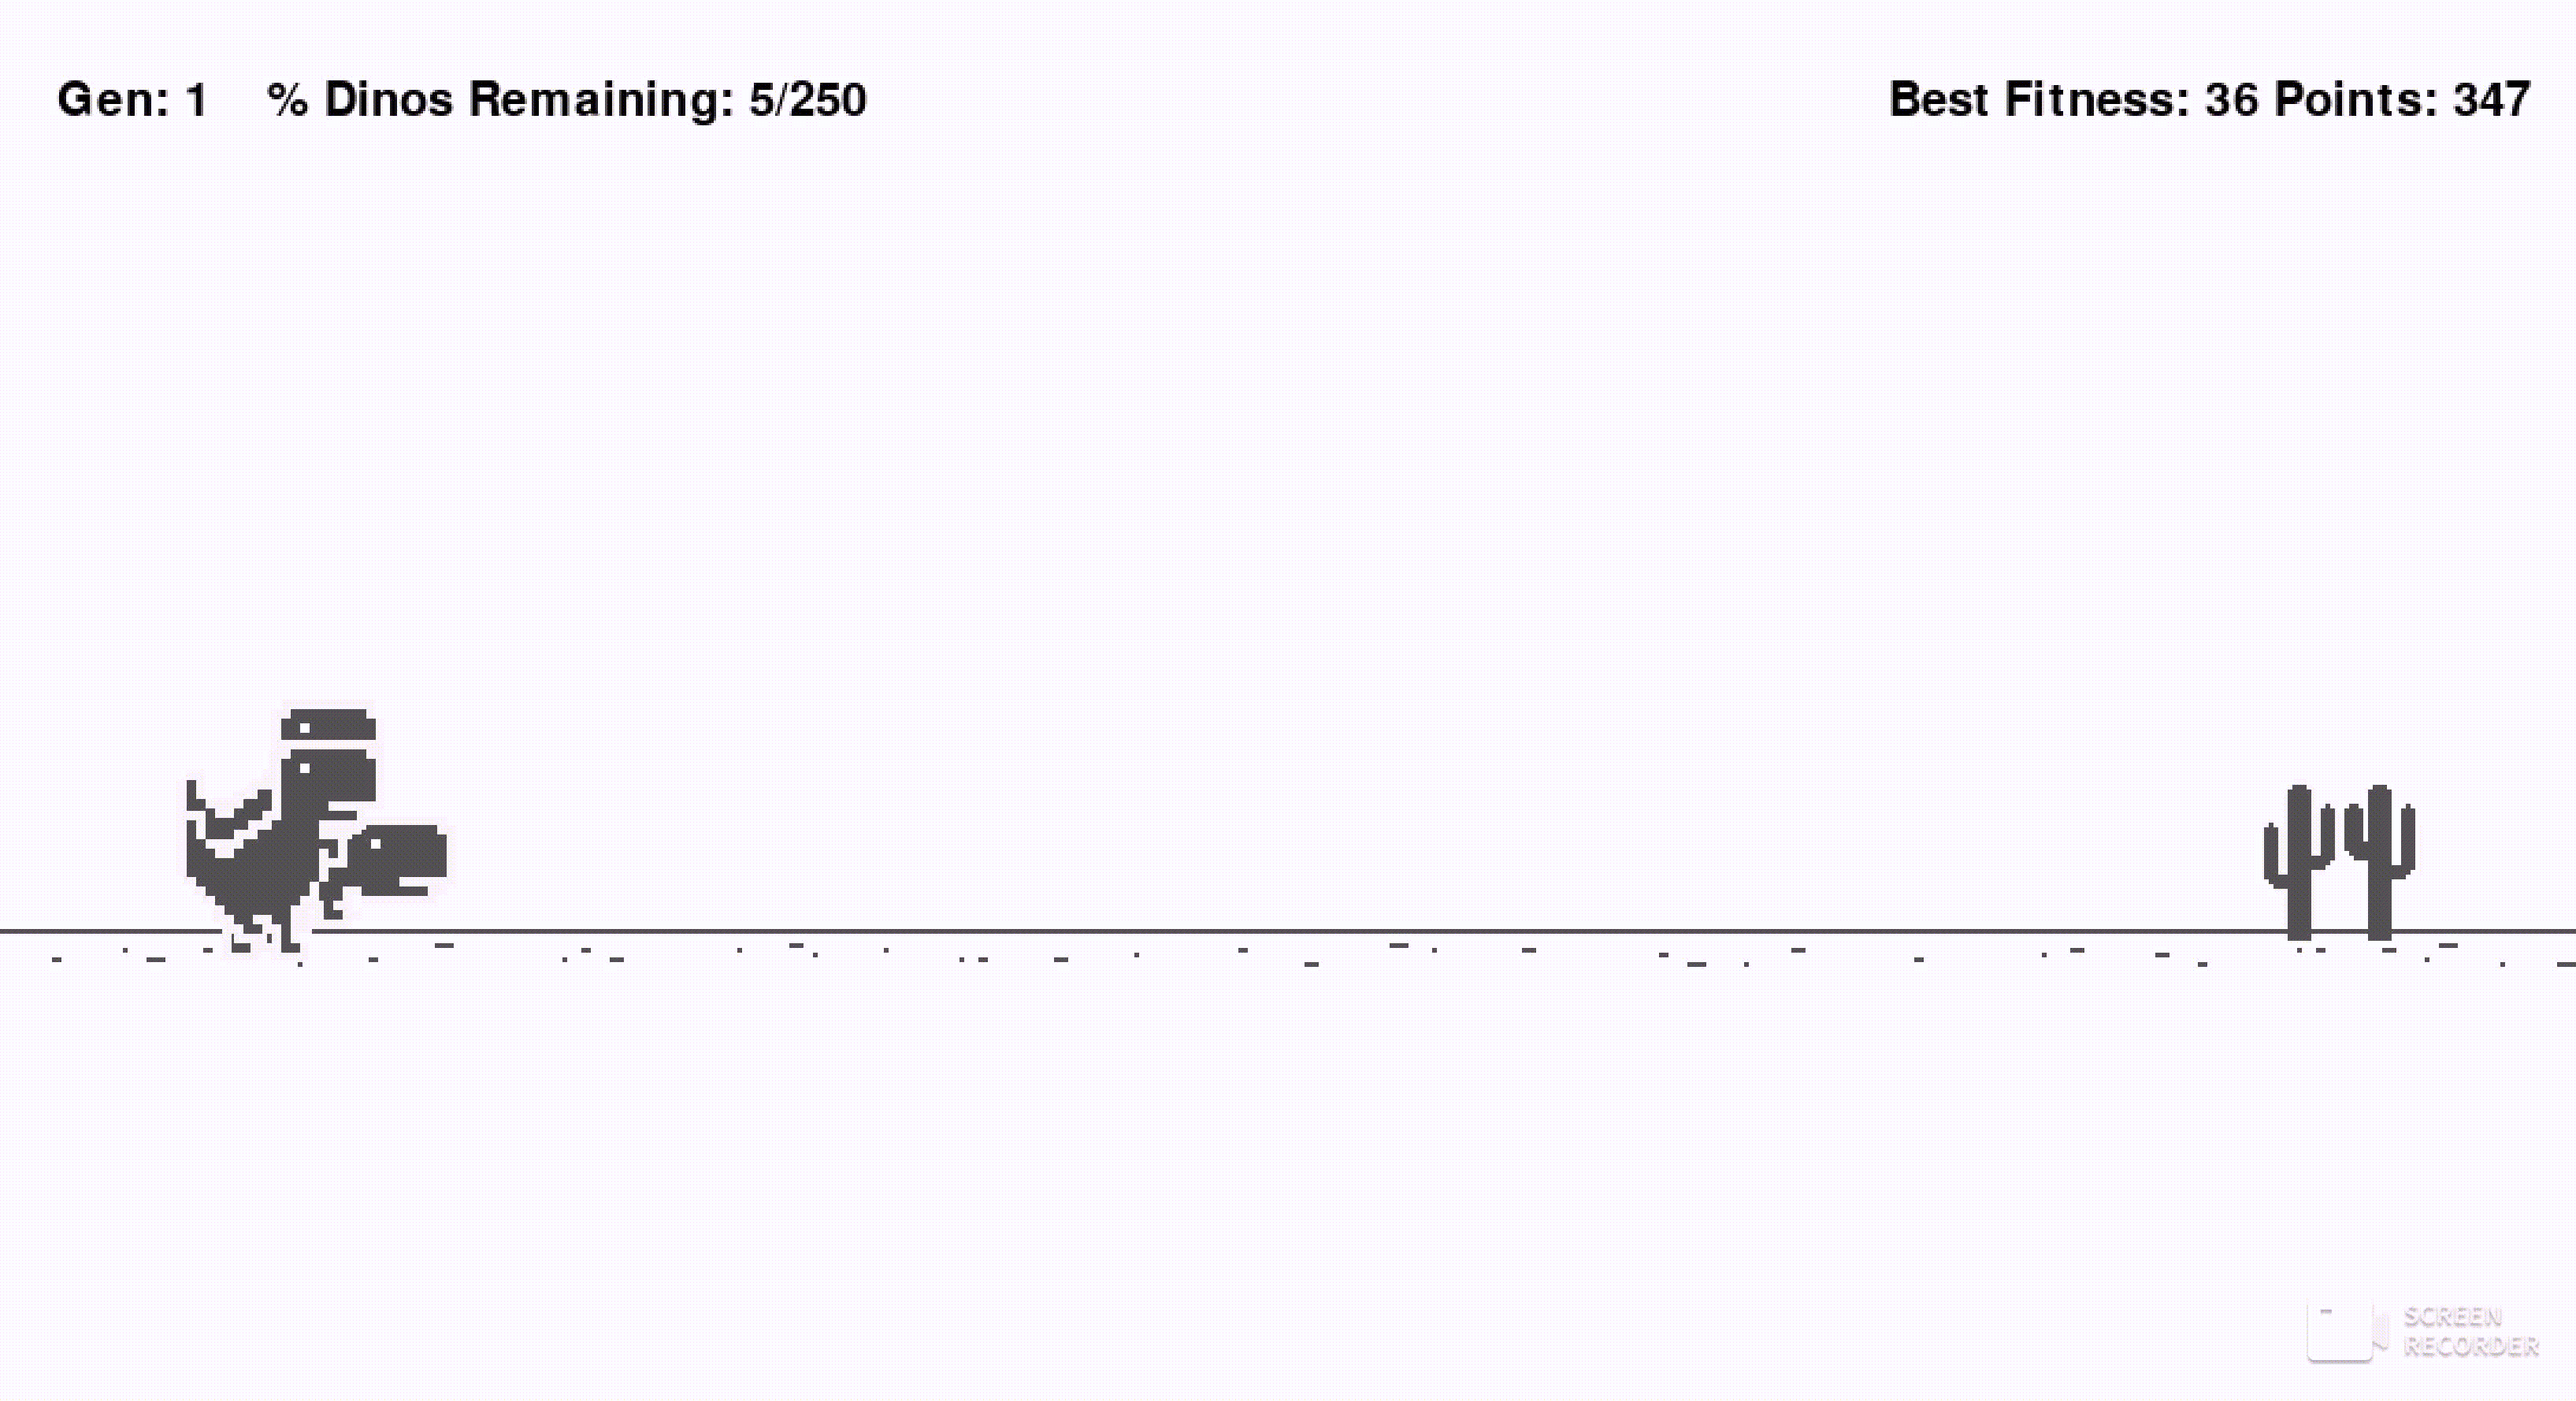 Programmatically generated dinos inspired by the dino runner from